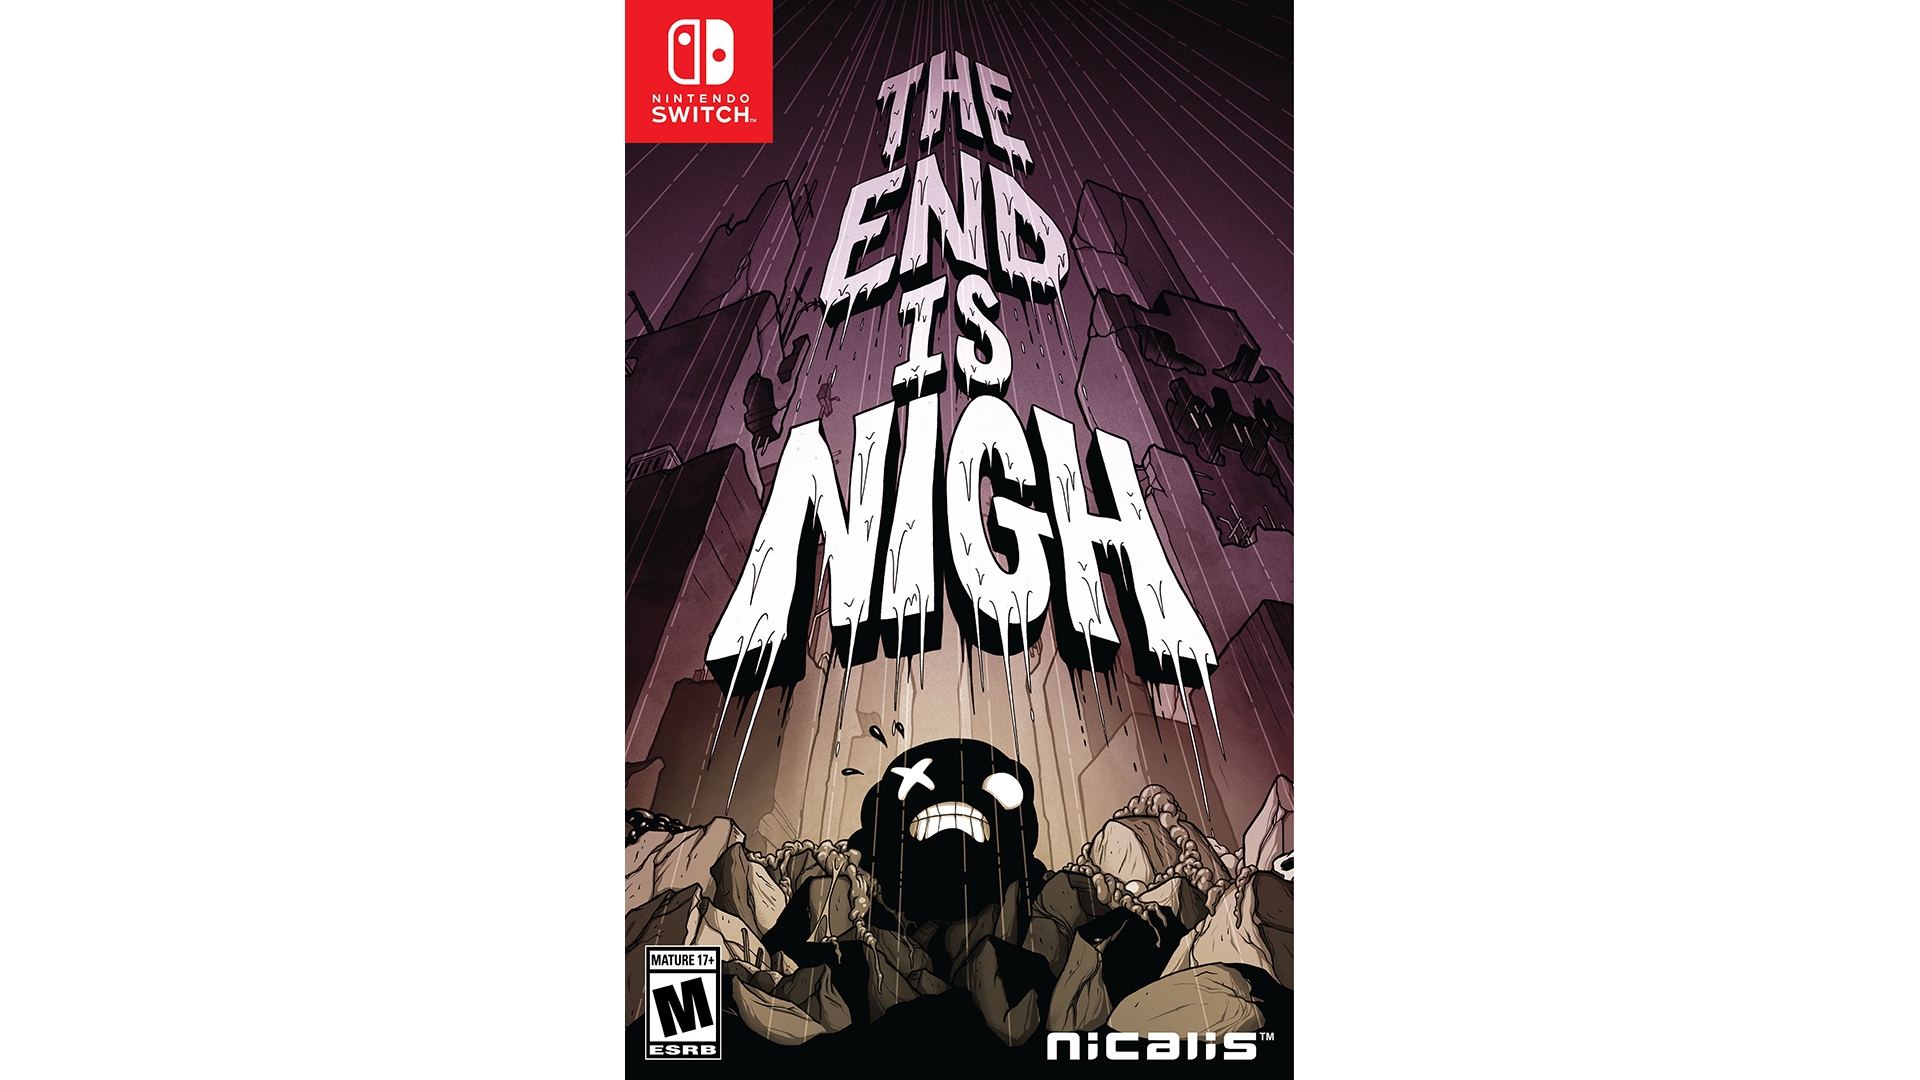 The end is nigh игра. The end is nigh (Video game). The end is nigh арты по игре. The end is nigh арт.